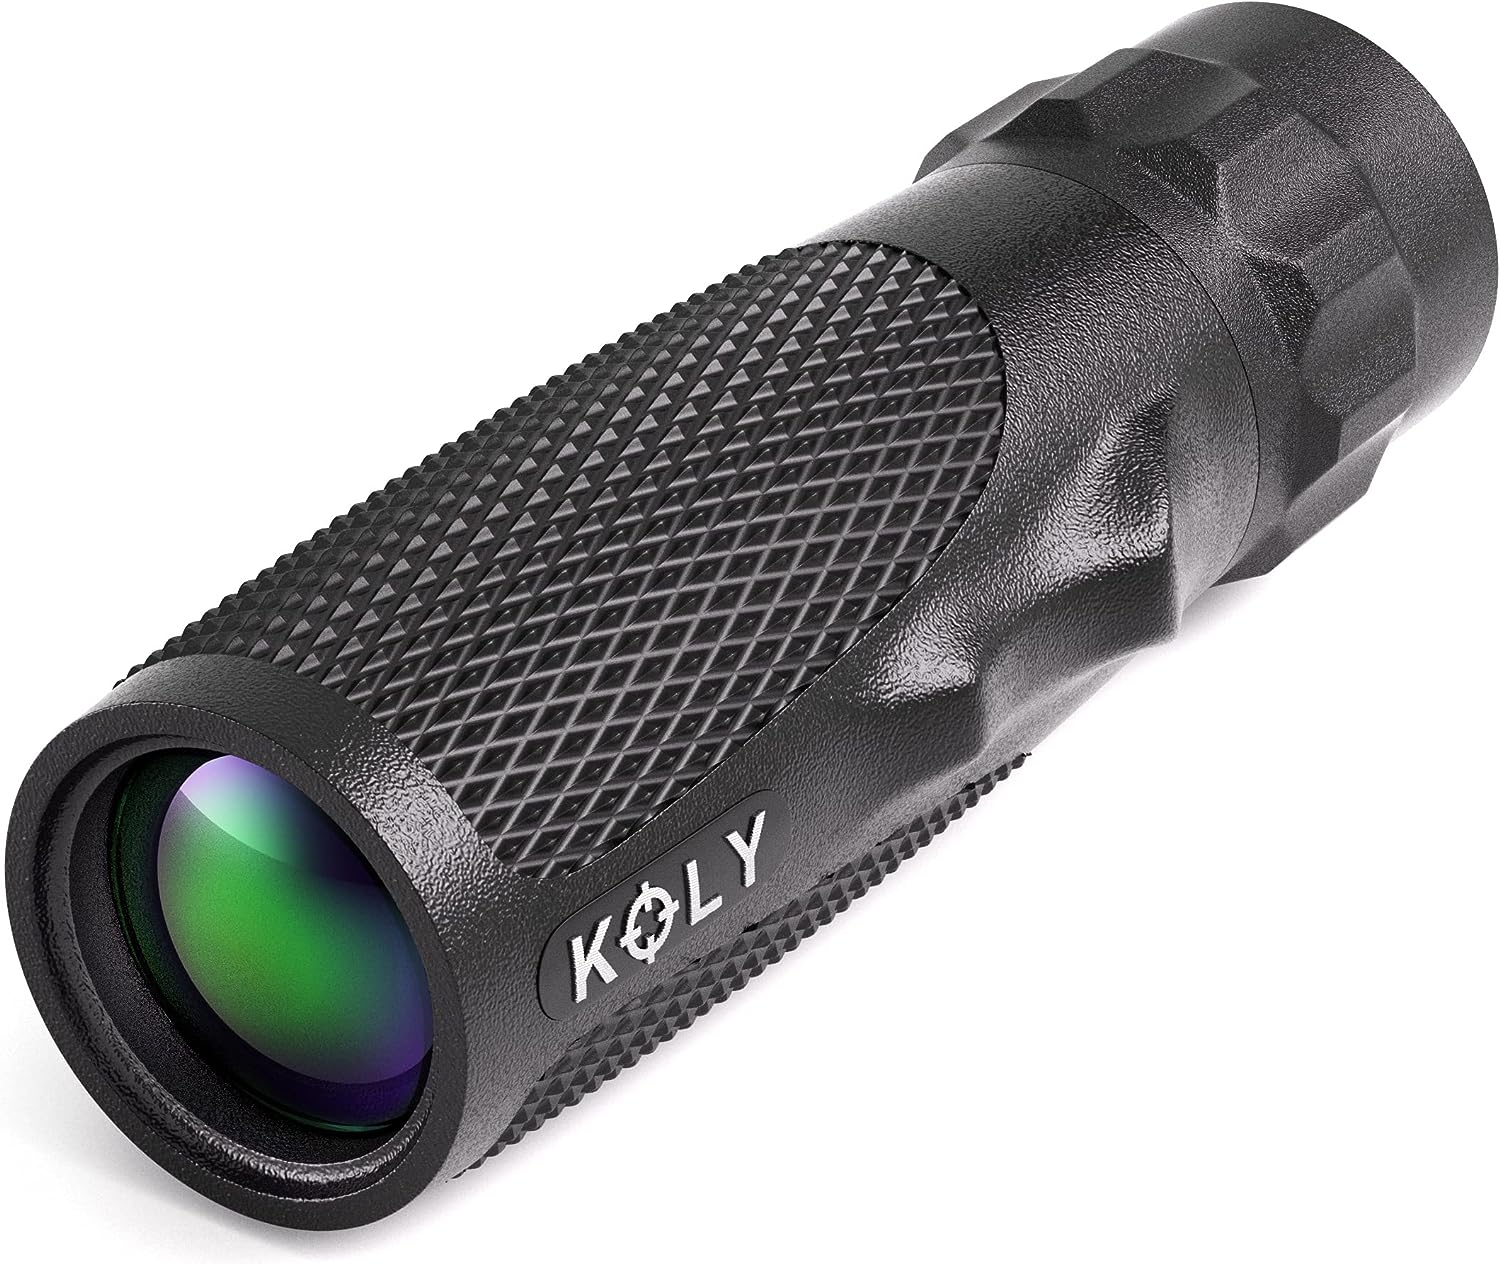 Koly BAK-4 Prism 10X25 Monocular Telescope, Compact Weather Resistant Scope with Snake Skin Grip, Designed for Bird Watching, Hiking, Hunting, Archery, and More, 10X Magnification, Black